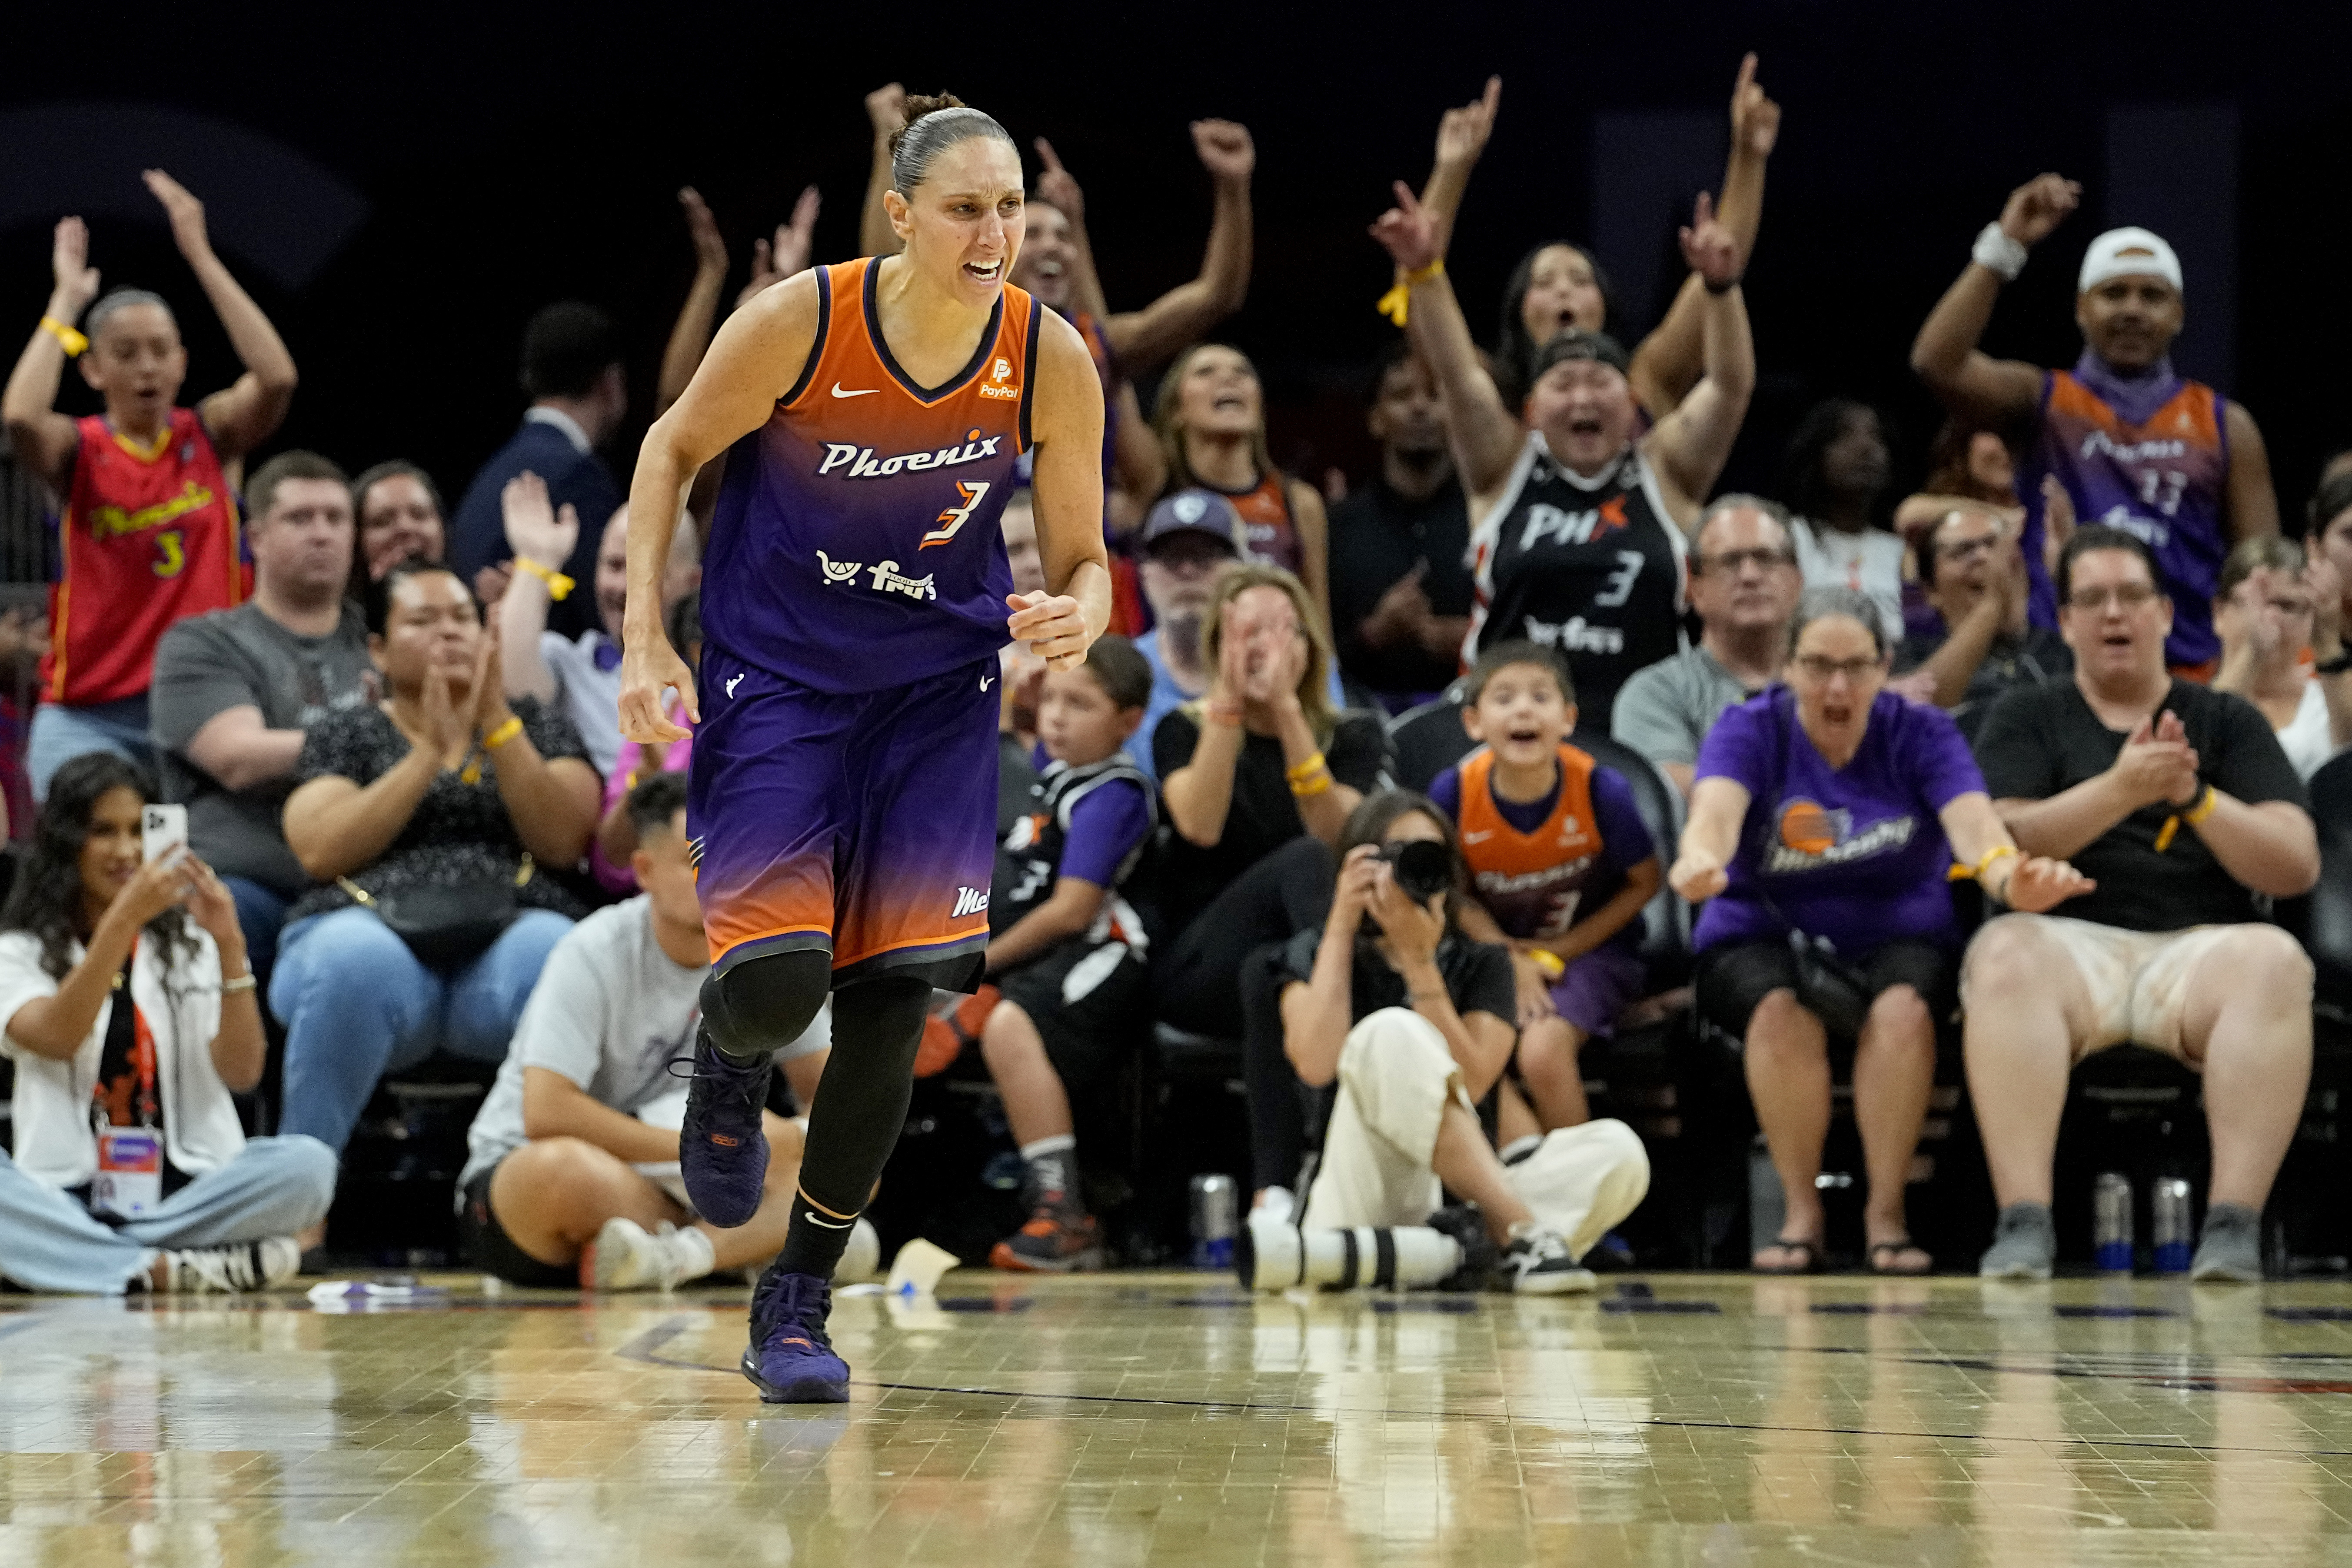 Diana Taurasi becomes first WNBA player to reach 10,000 points